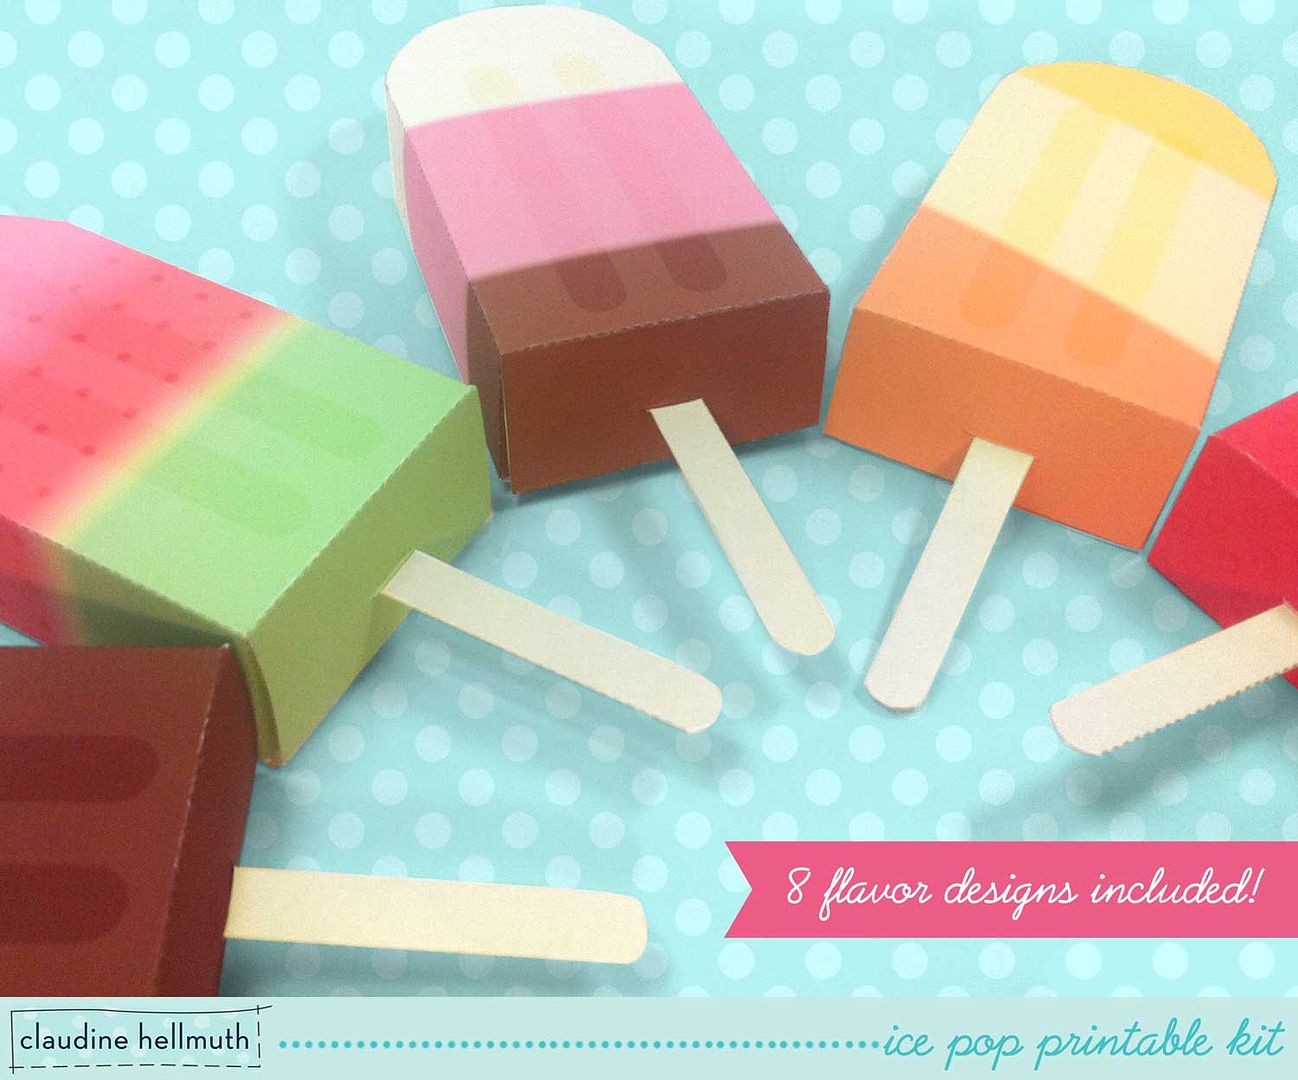 Printable popsicle gift card holder by Claudine Helmuth